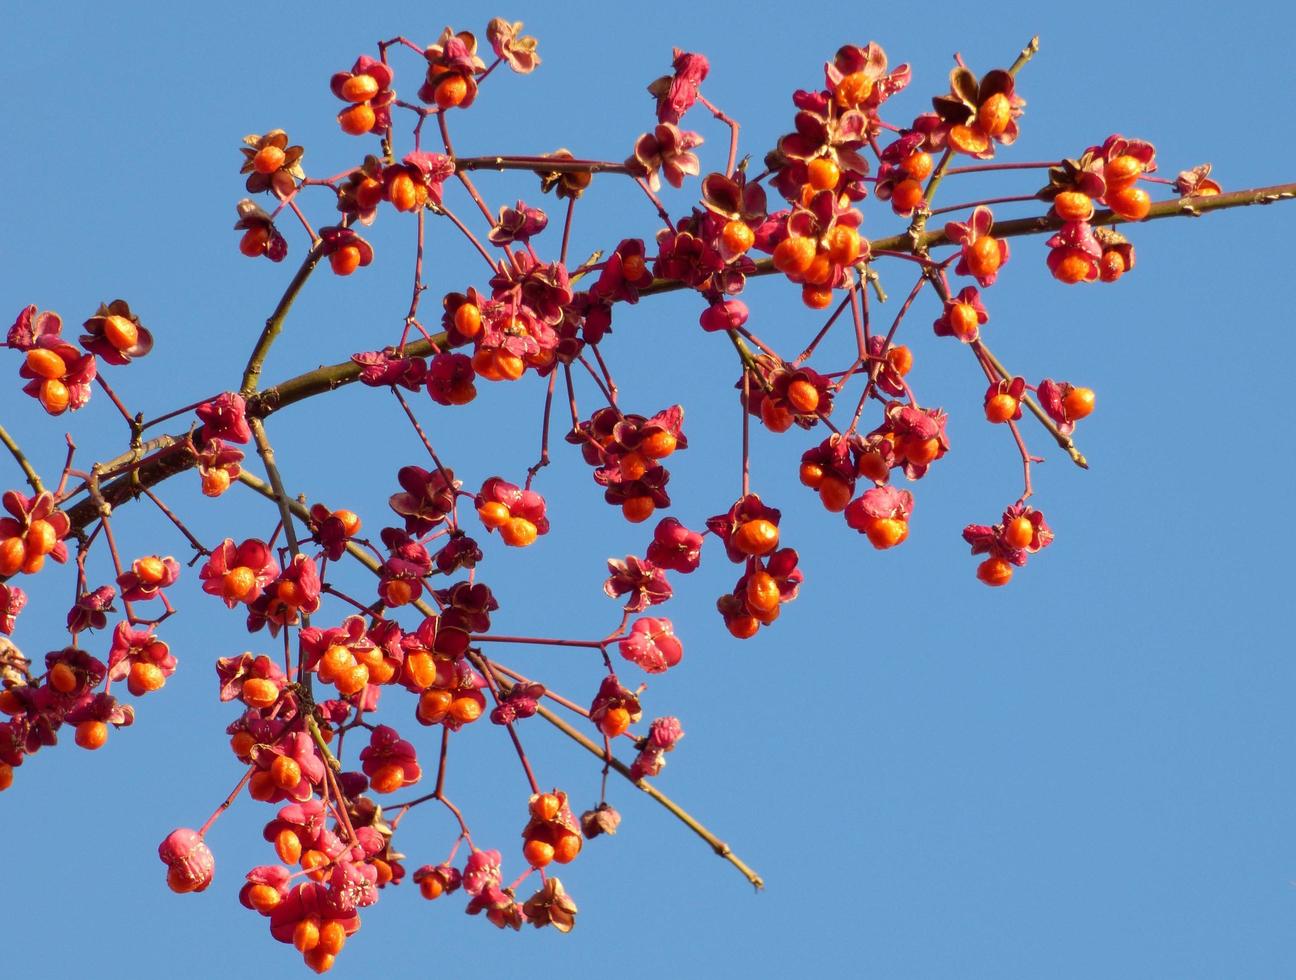 Red berries on a branch photo